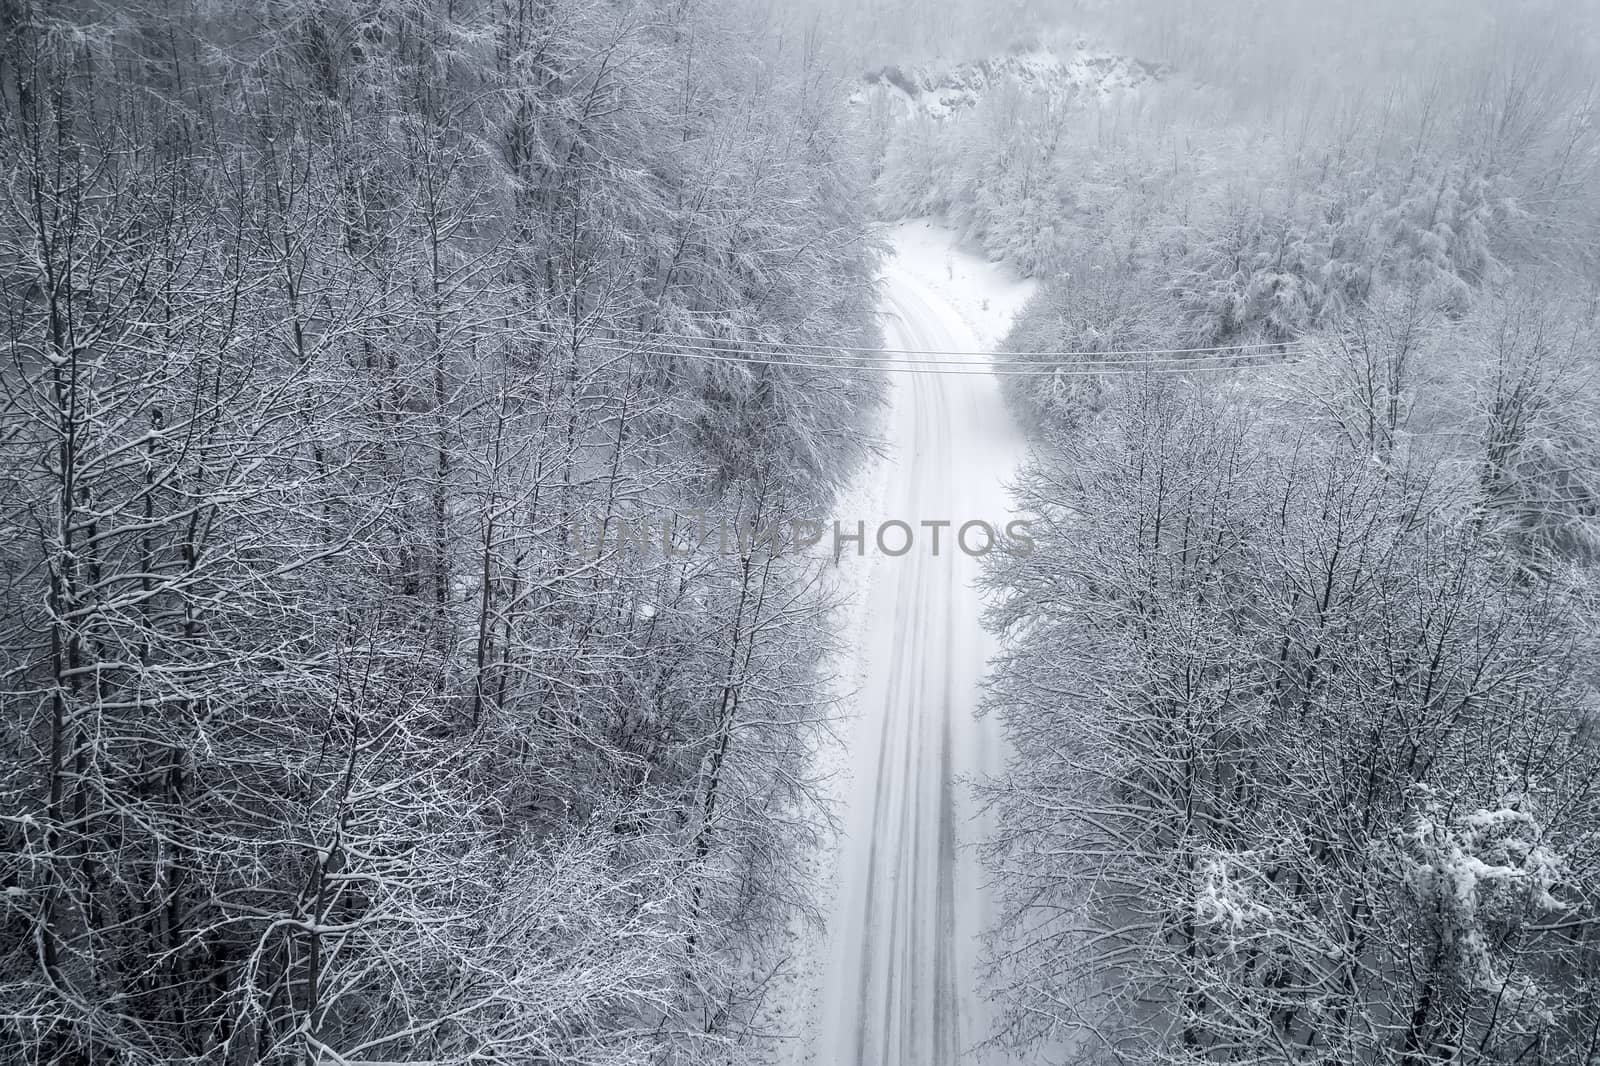 Aerial view of snowy forest with a road by ververidis